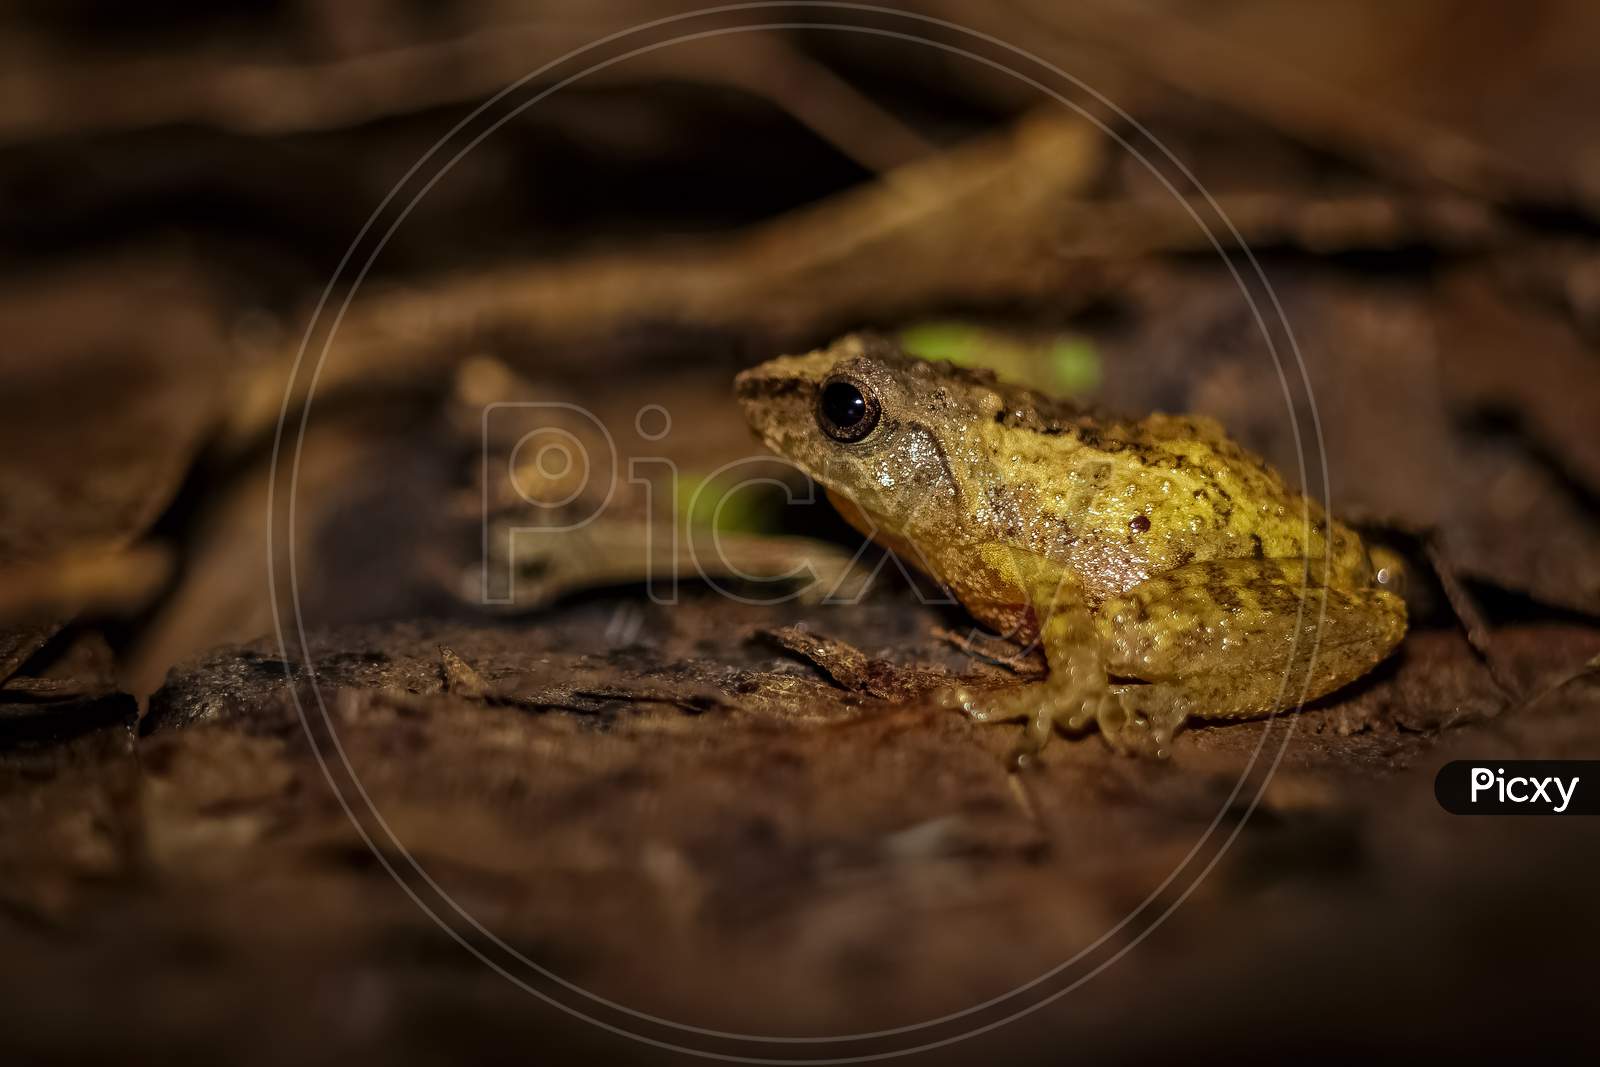 Small Yellow Tree Frog - Small-Headed Tree Frog On Rainforest Leaf In India. Is Also Called As Dendropsophus Microcephalus. Frog Macro Photography